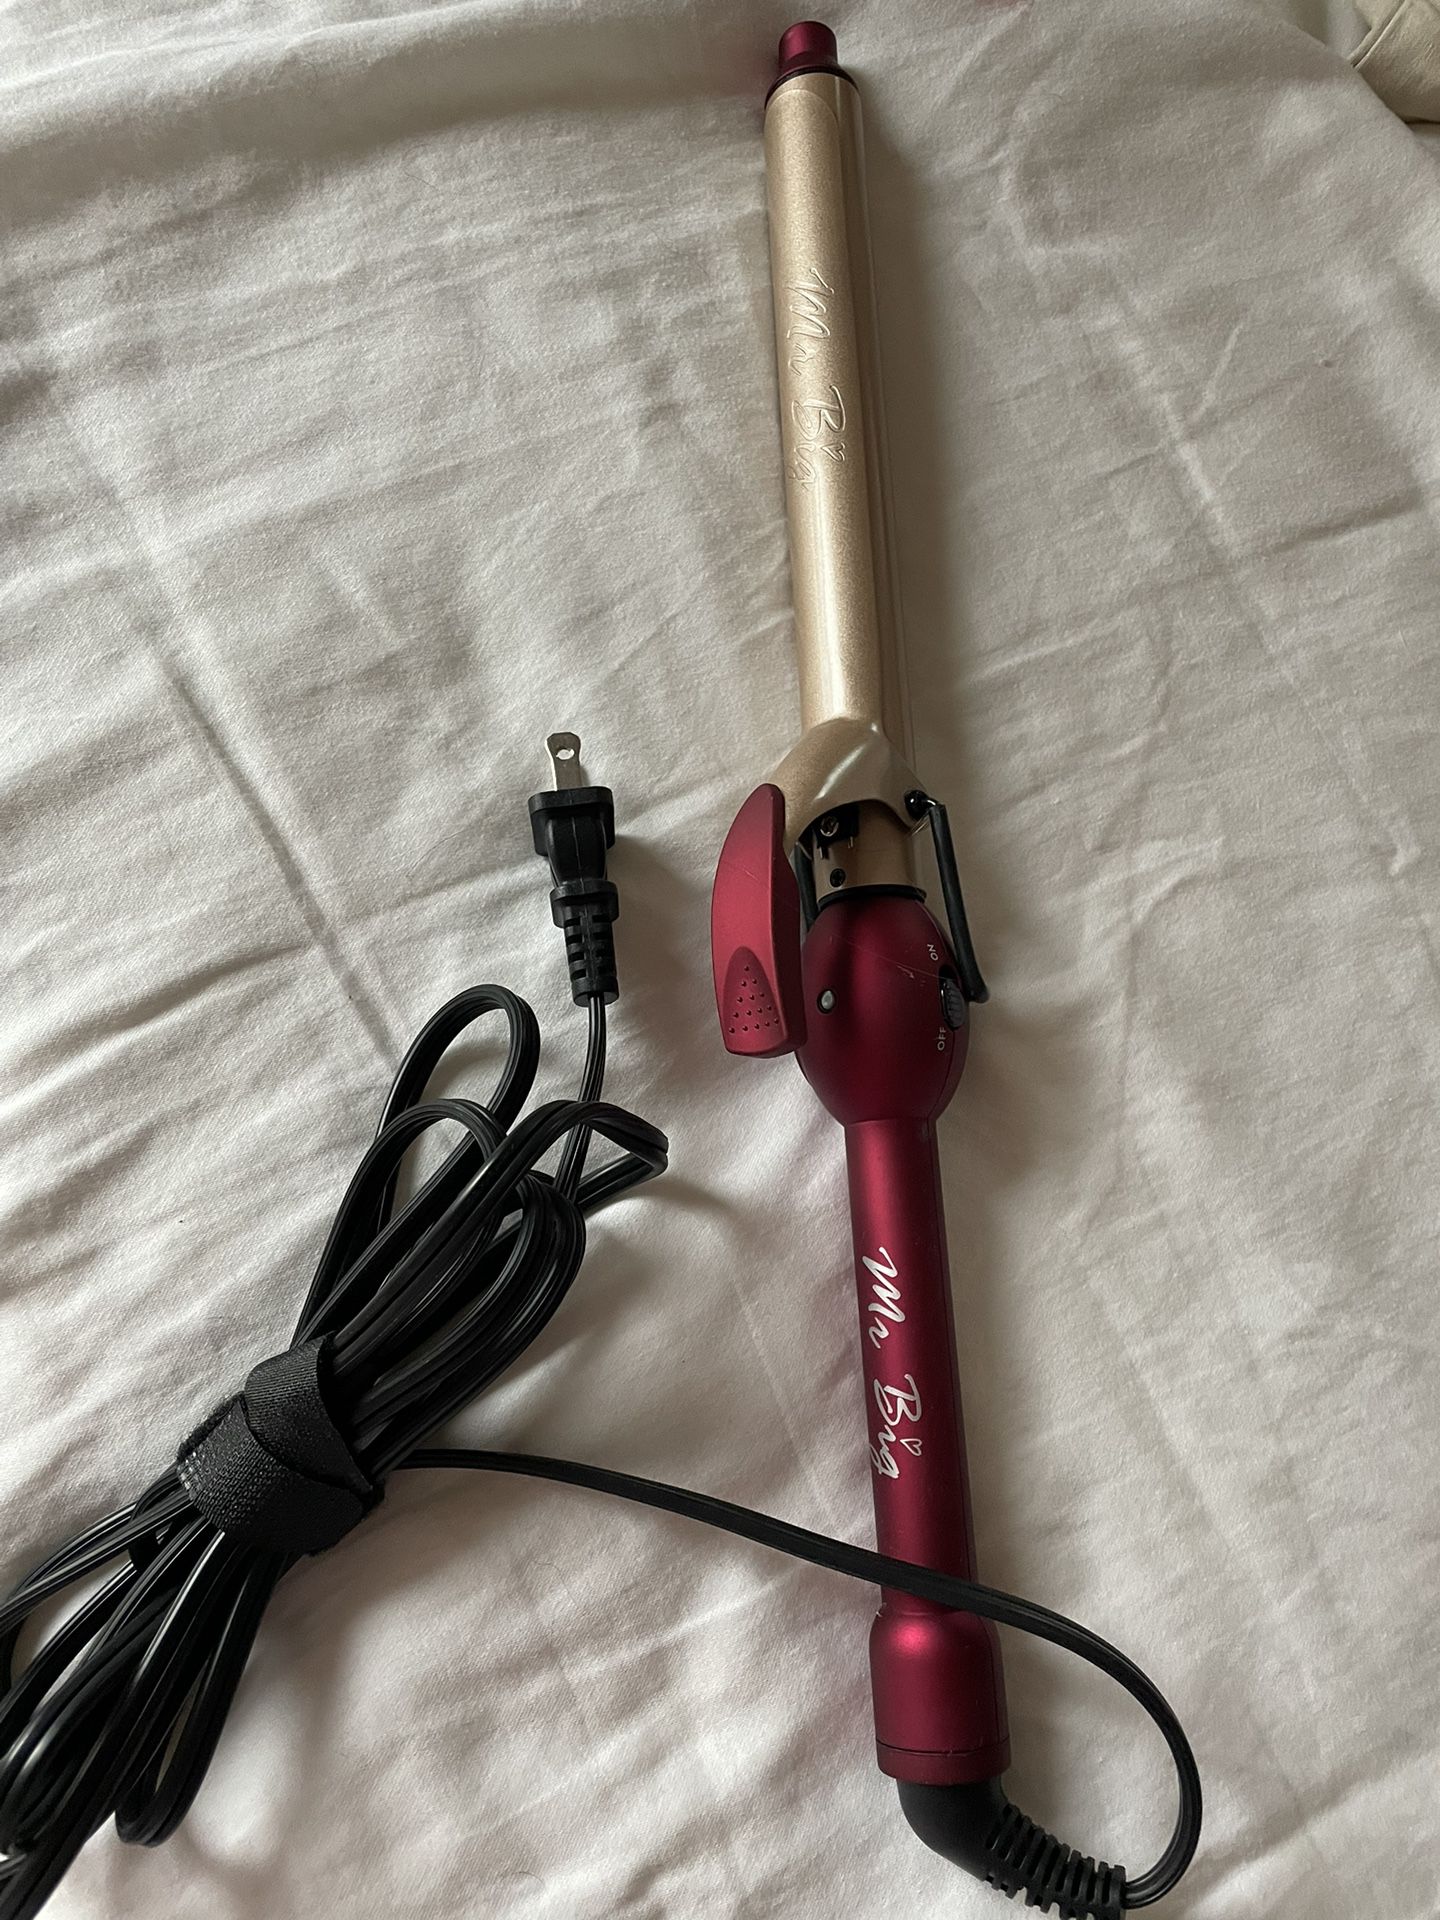 Mr Big Hair Curling Iron Wand - The Best, Longest XL Styling Curling 1”